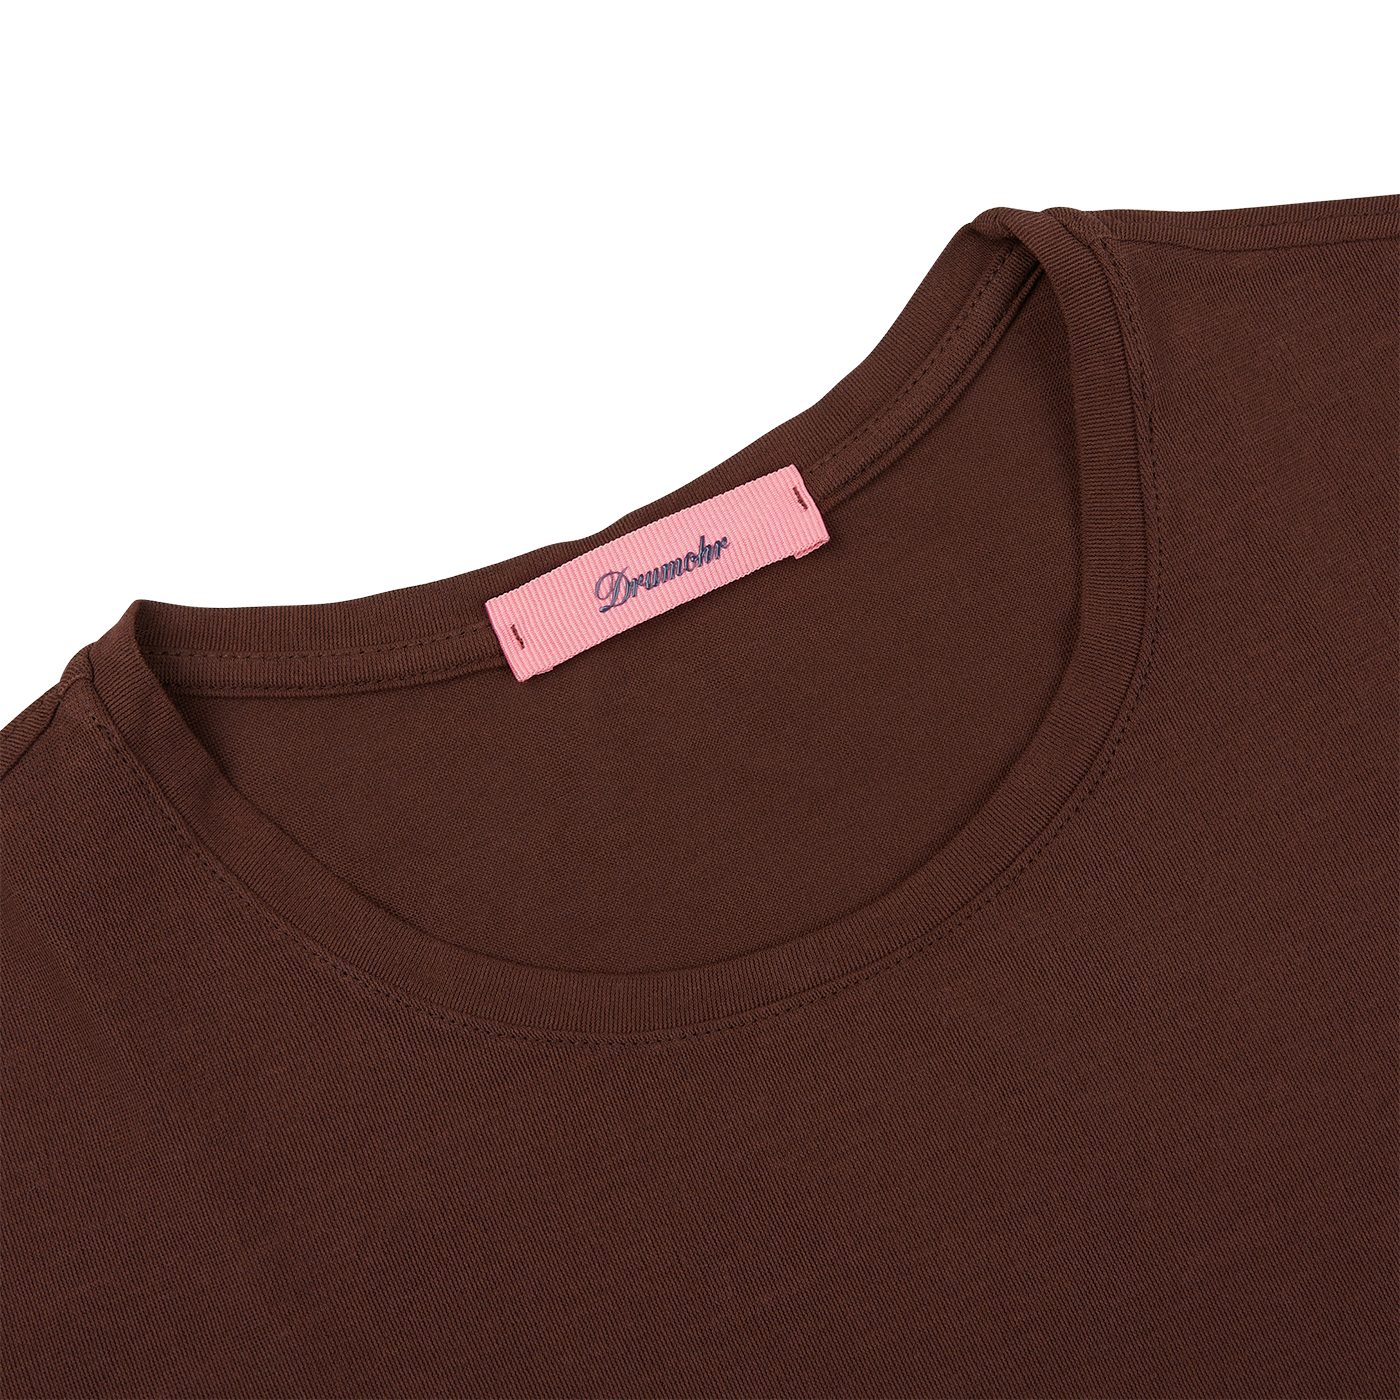 A Golden Brown Ice Cotton LS T-Shirt with a pink label imported from Italy by Drumohr.